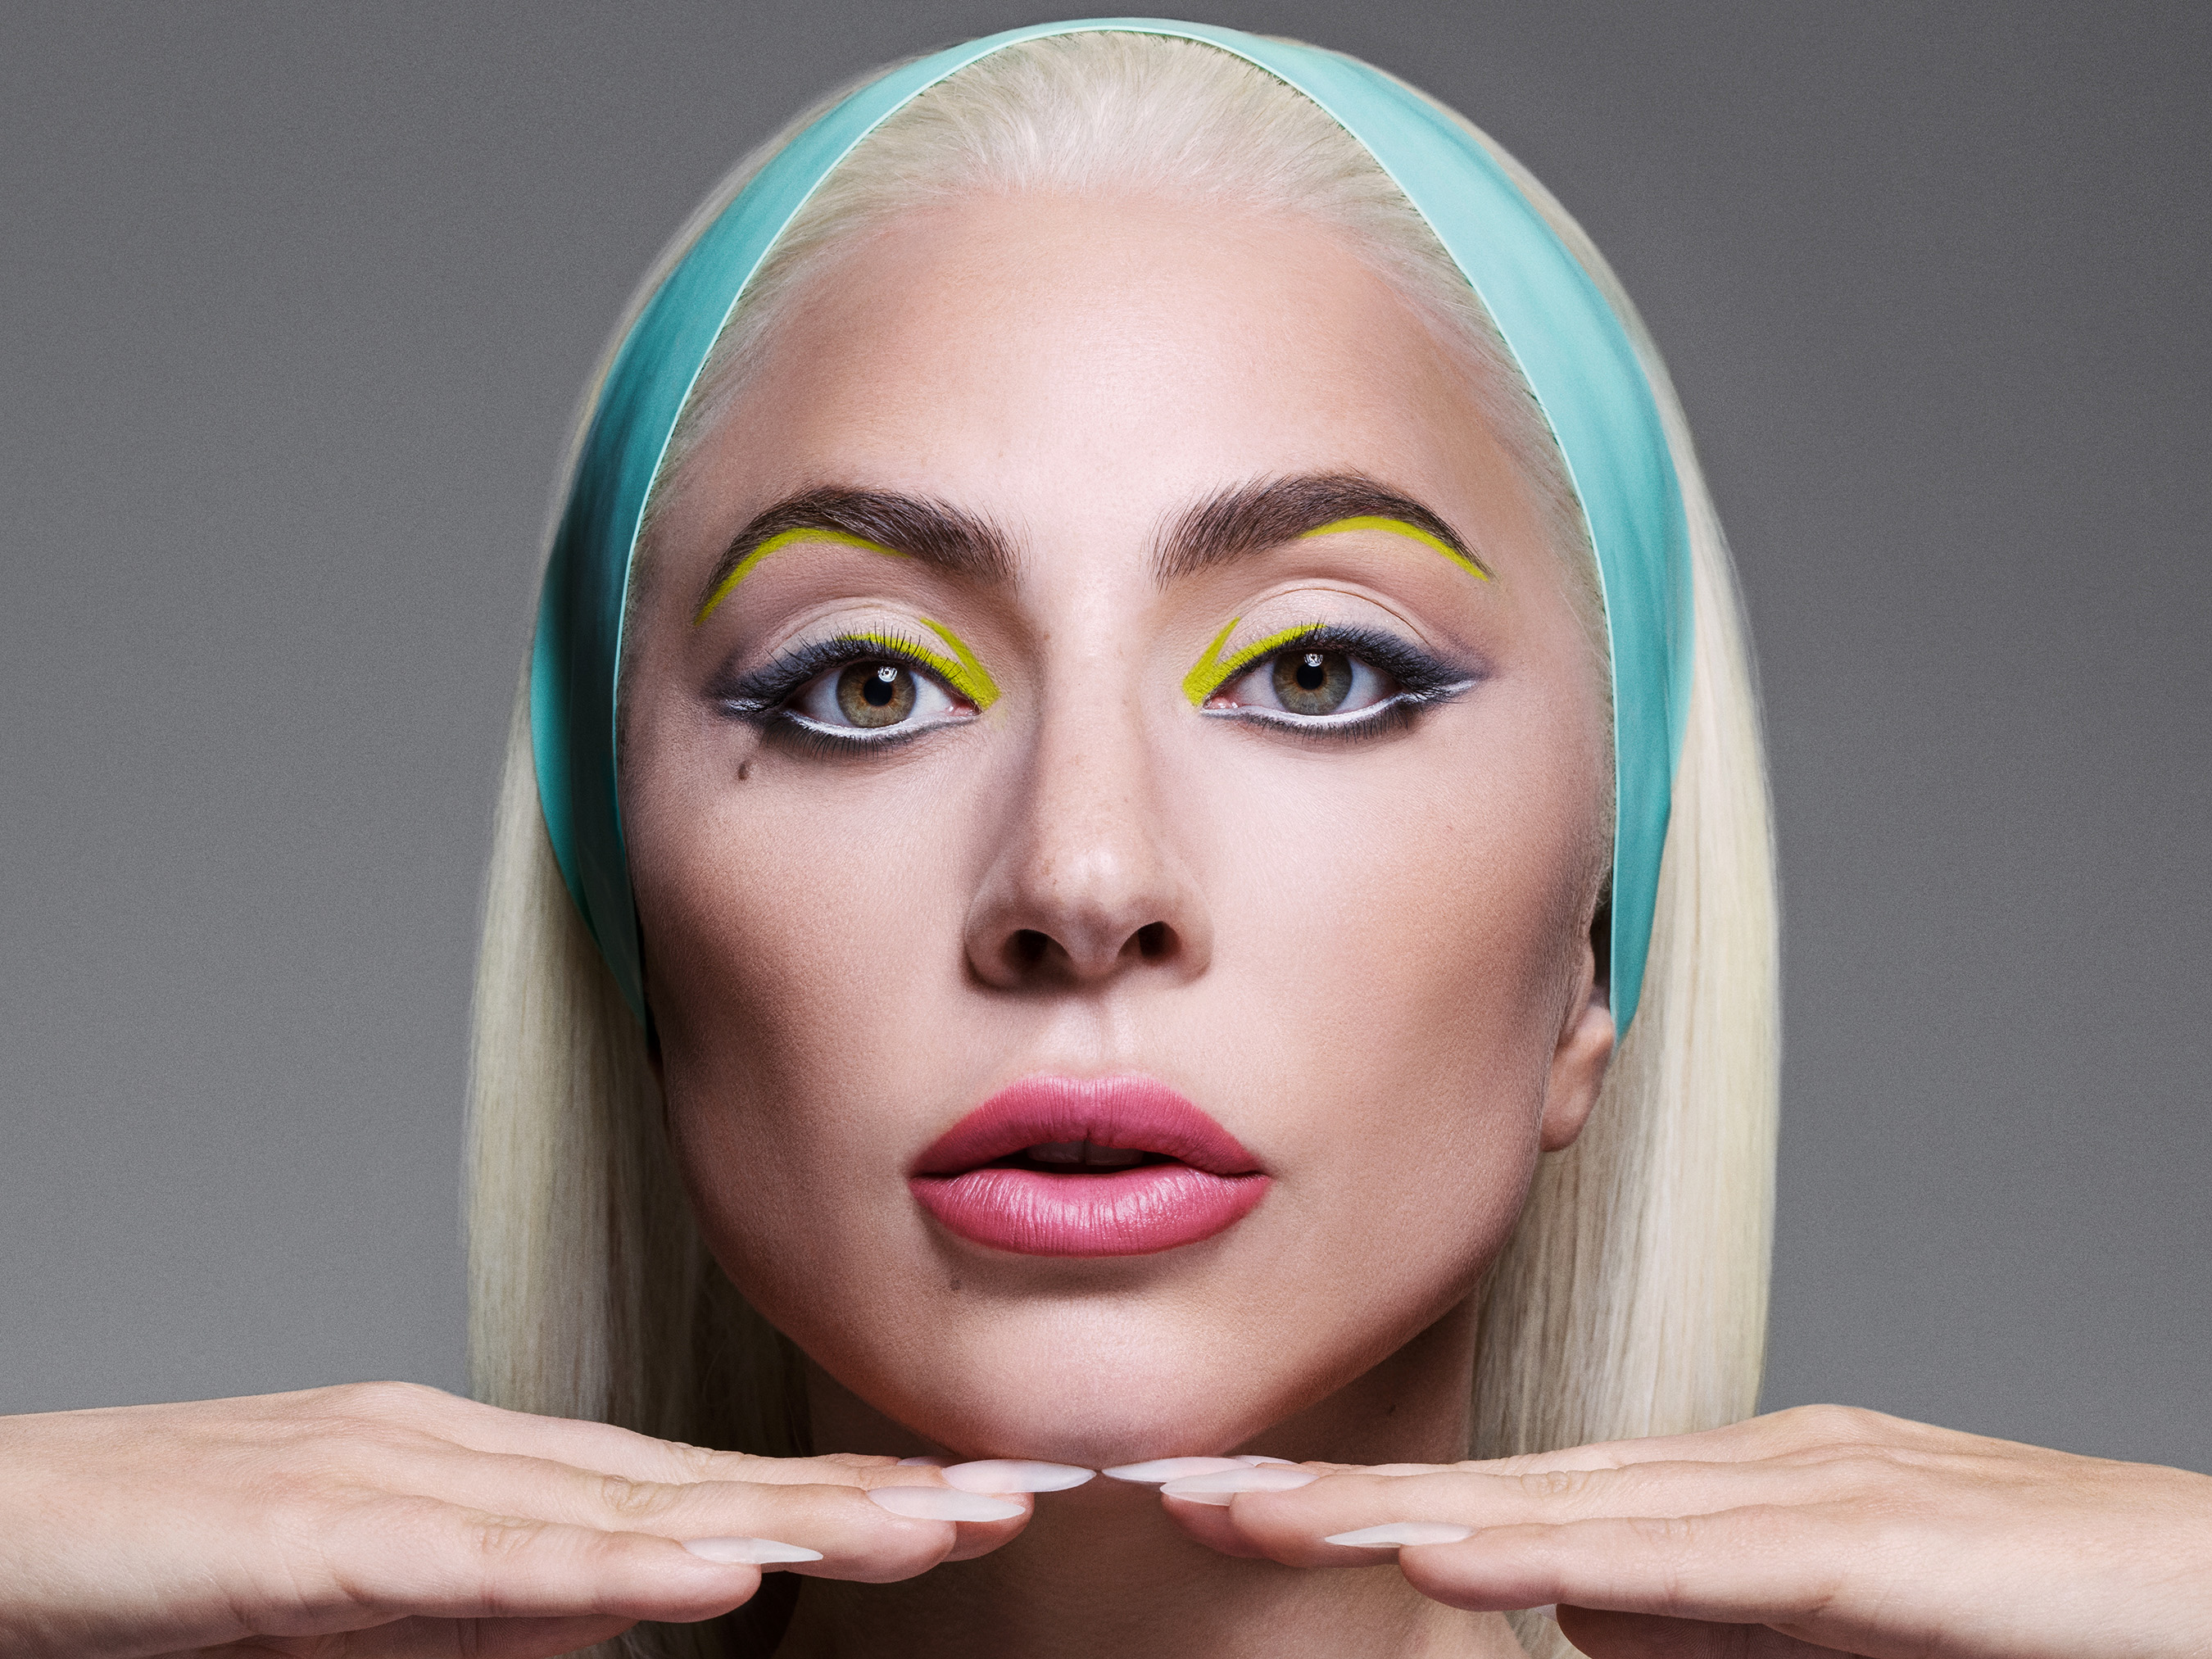 HAUS LABS BY LADY GAGA LAUNCHES IN EUROPE EXCLUSIVELY WITH SEPHORA, ACROSS 12 EU COUNTRIES